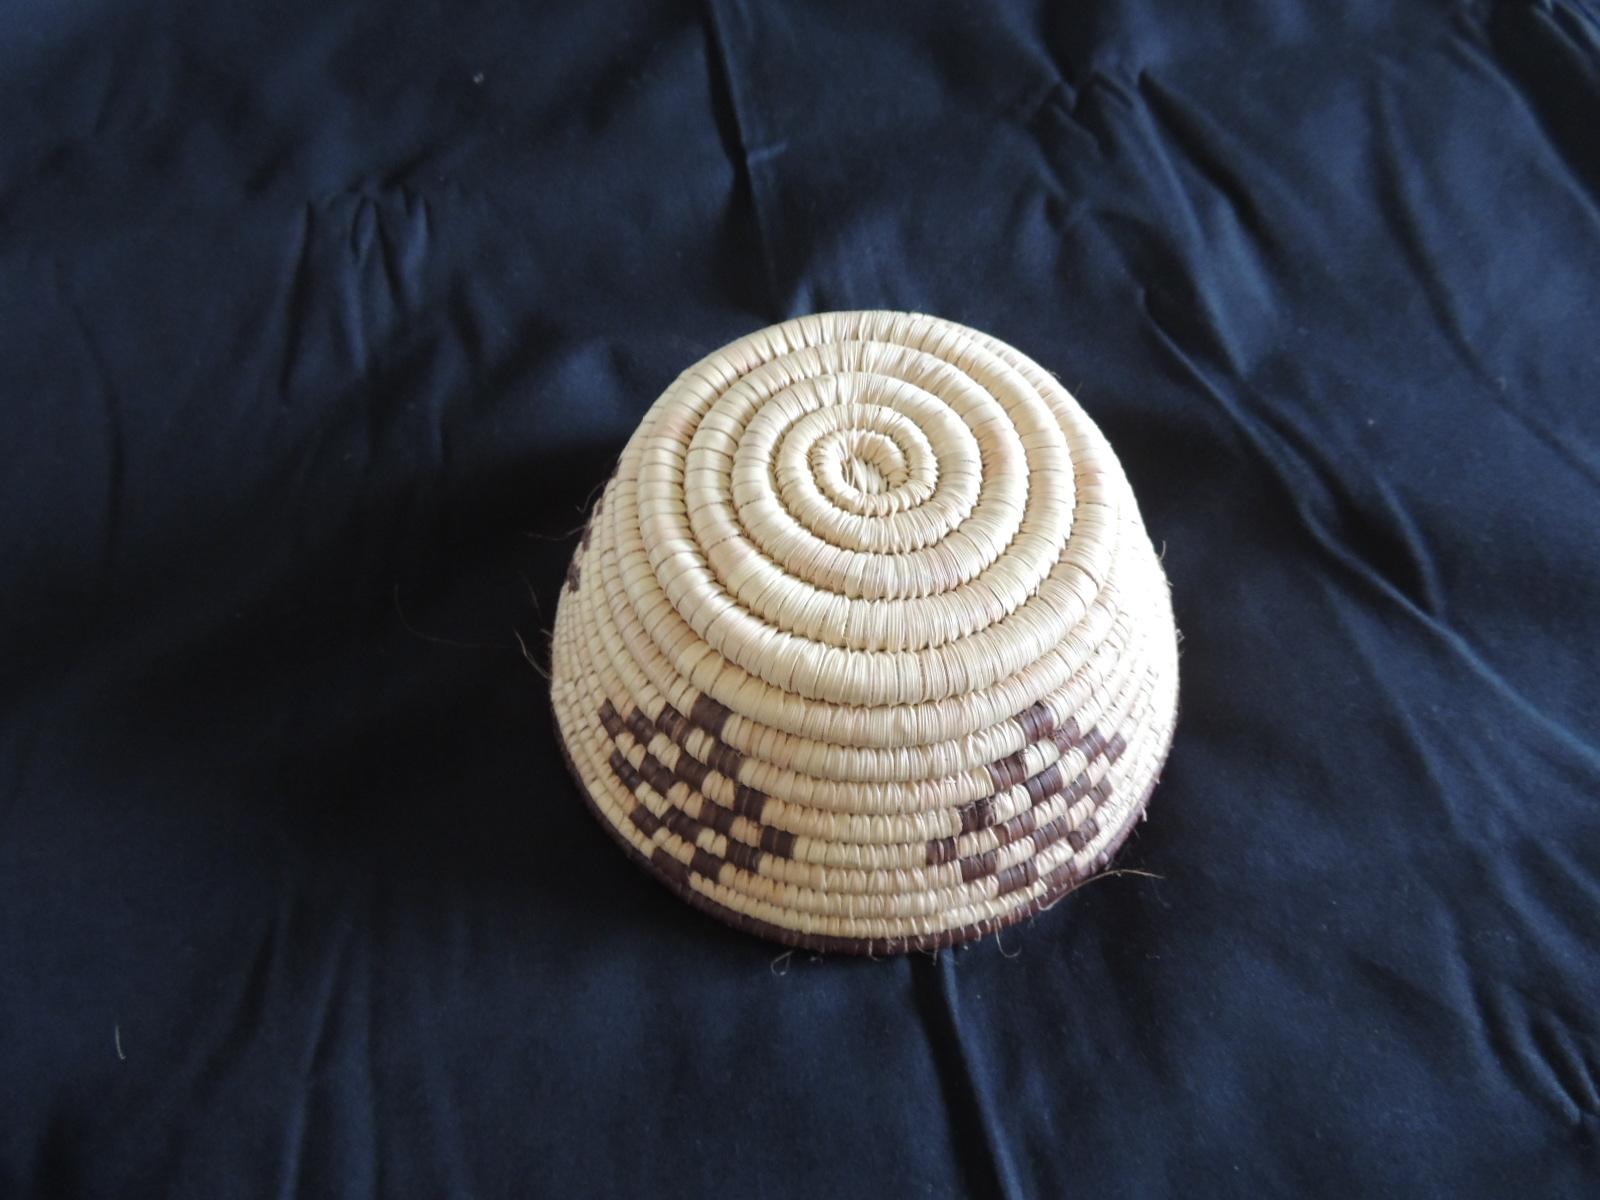 North American Small Tribal Woven Basket in Natural and Brow